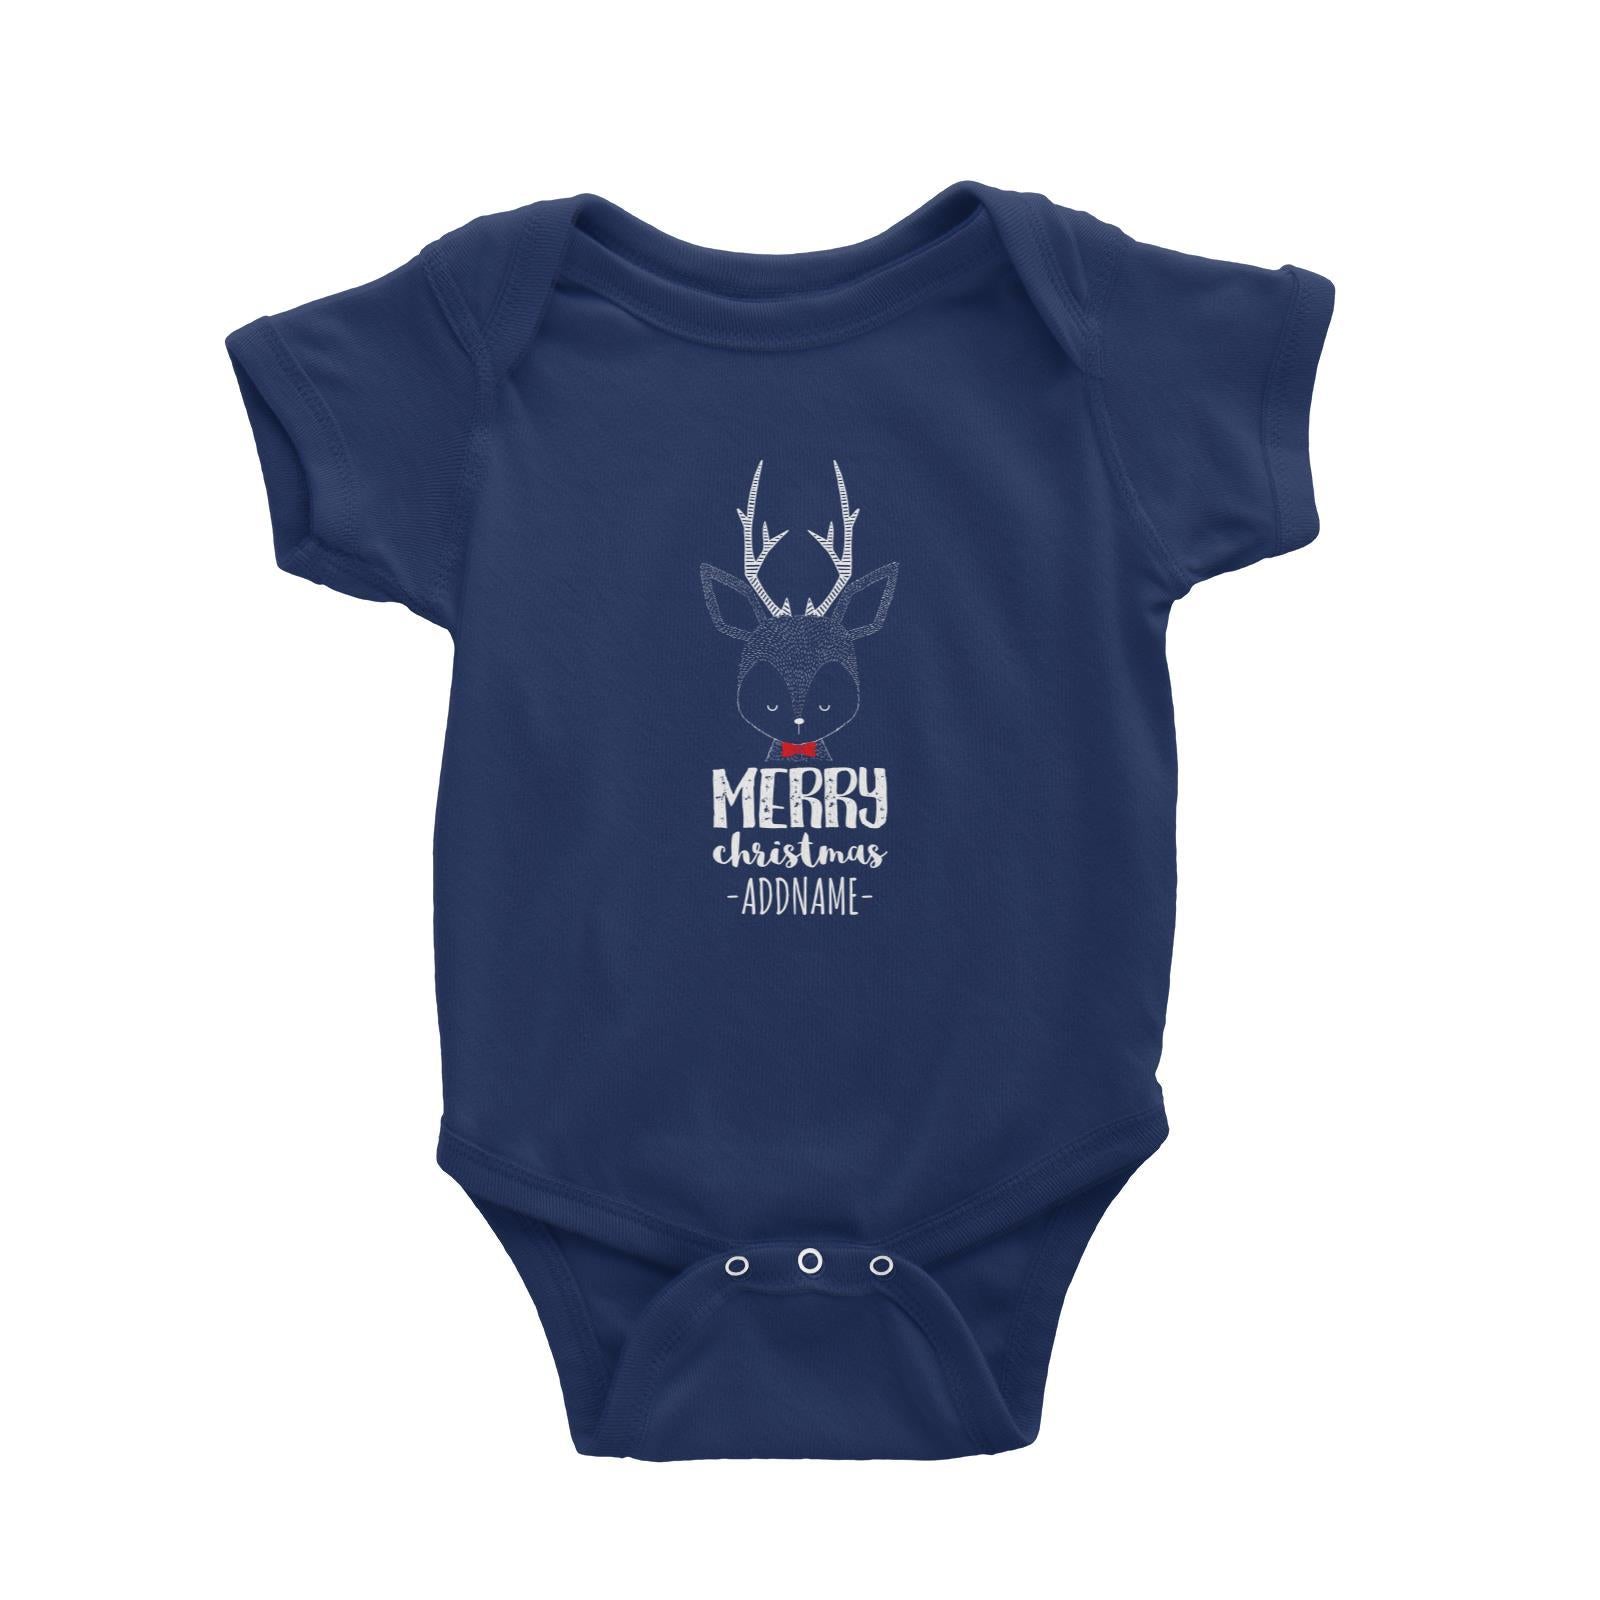 Reindeer Doodle Merry Christmas Greeying Addname Baby Romper  Personalizable Designs Animal Matching Family